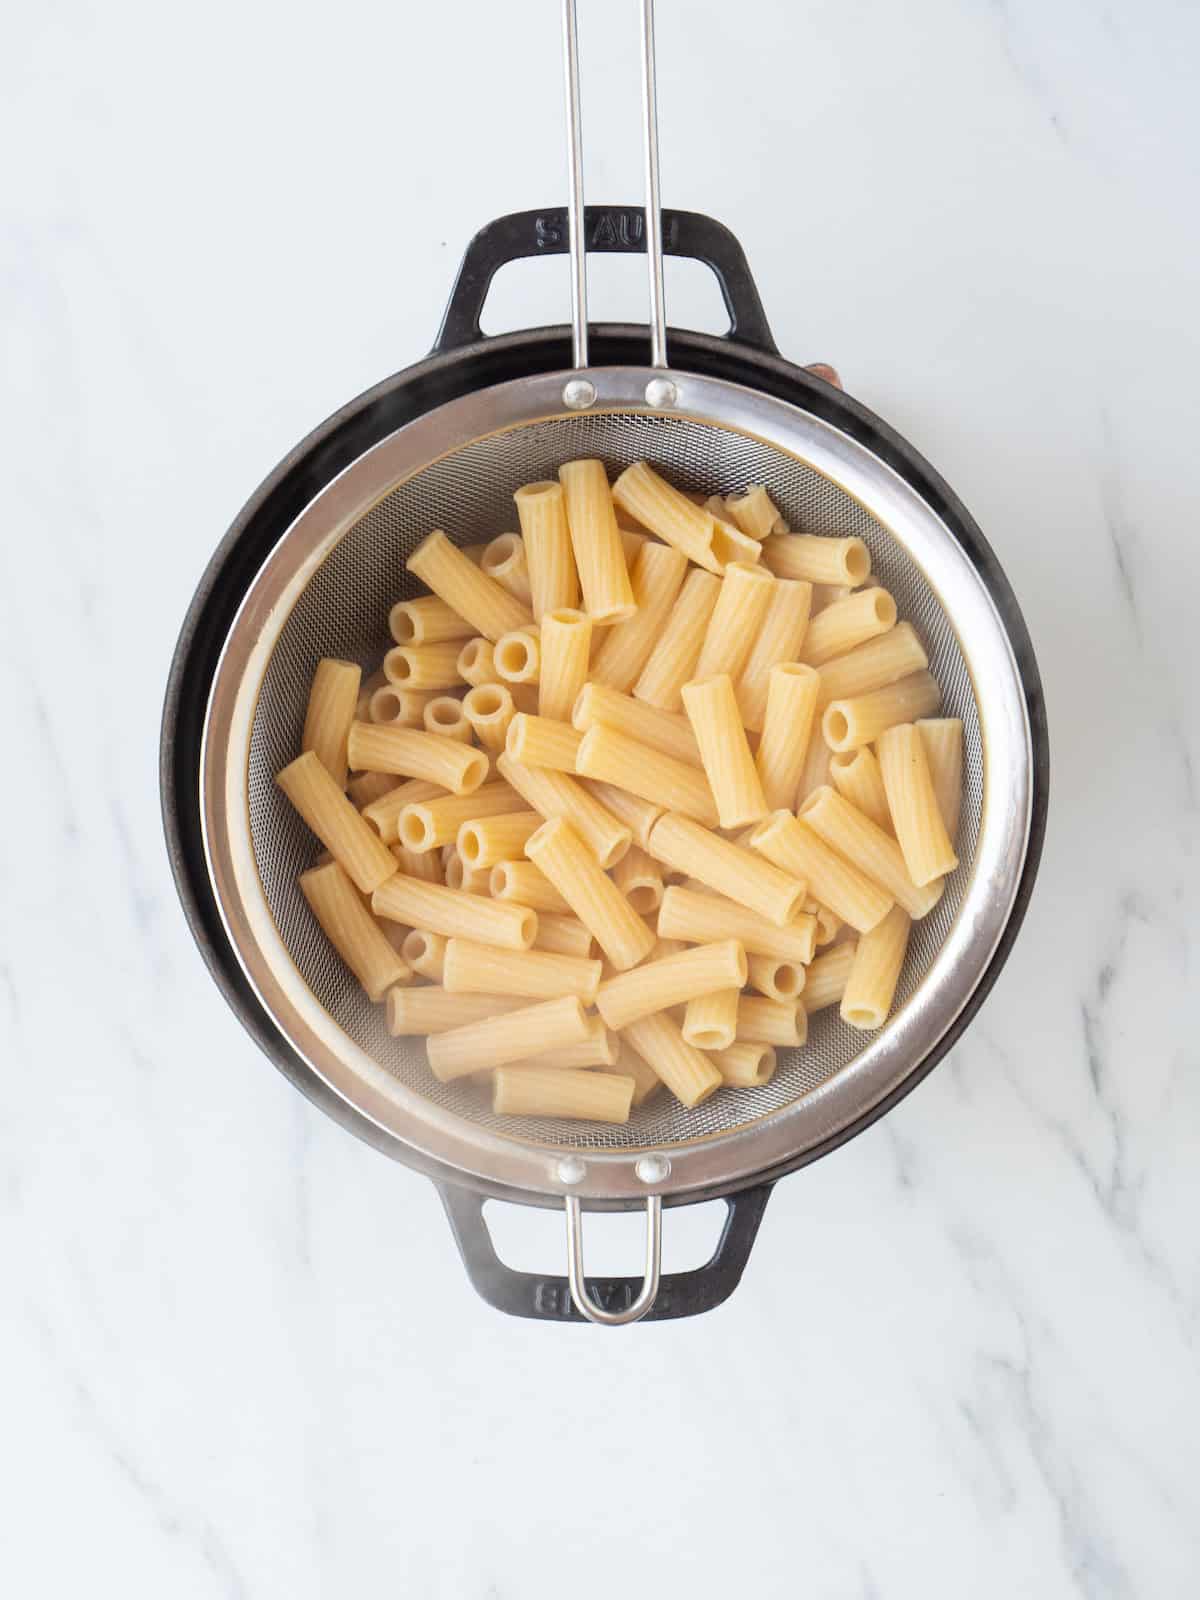 A pot with a sieve with boiled pasta.